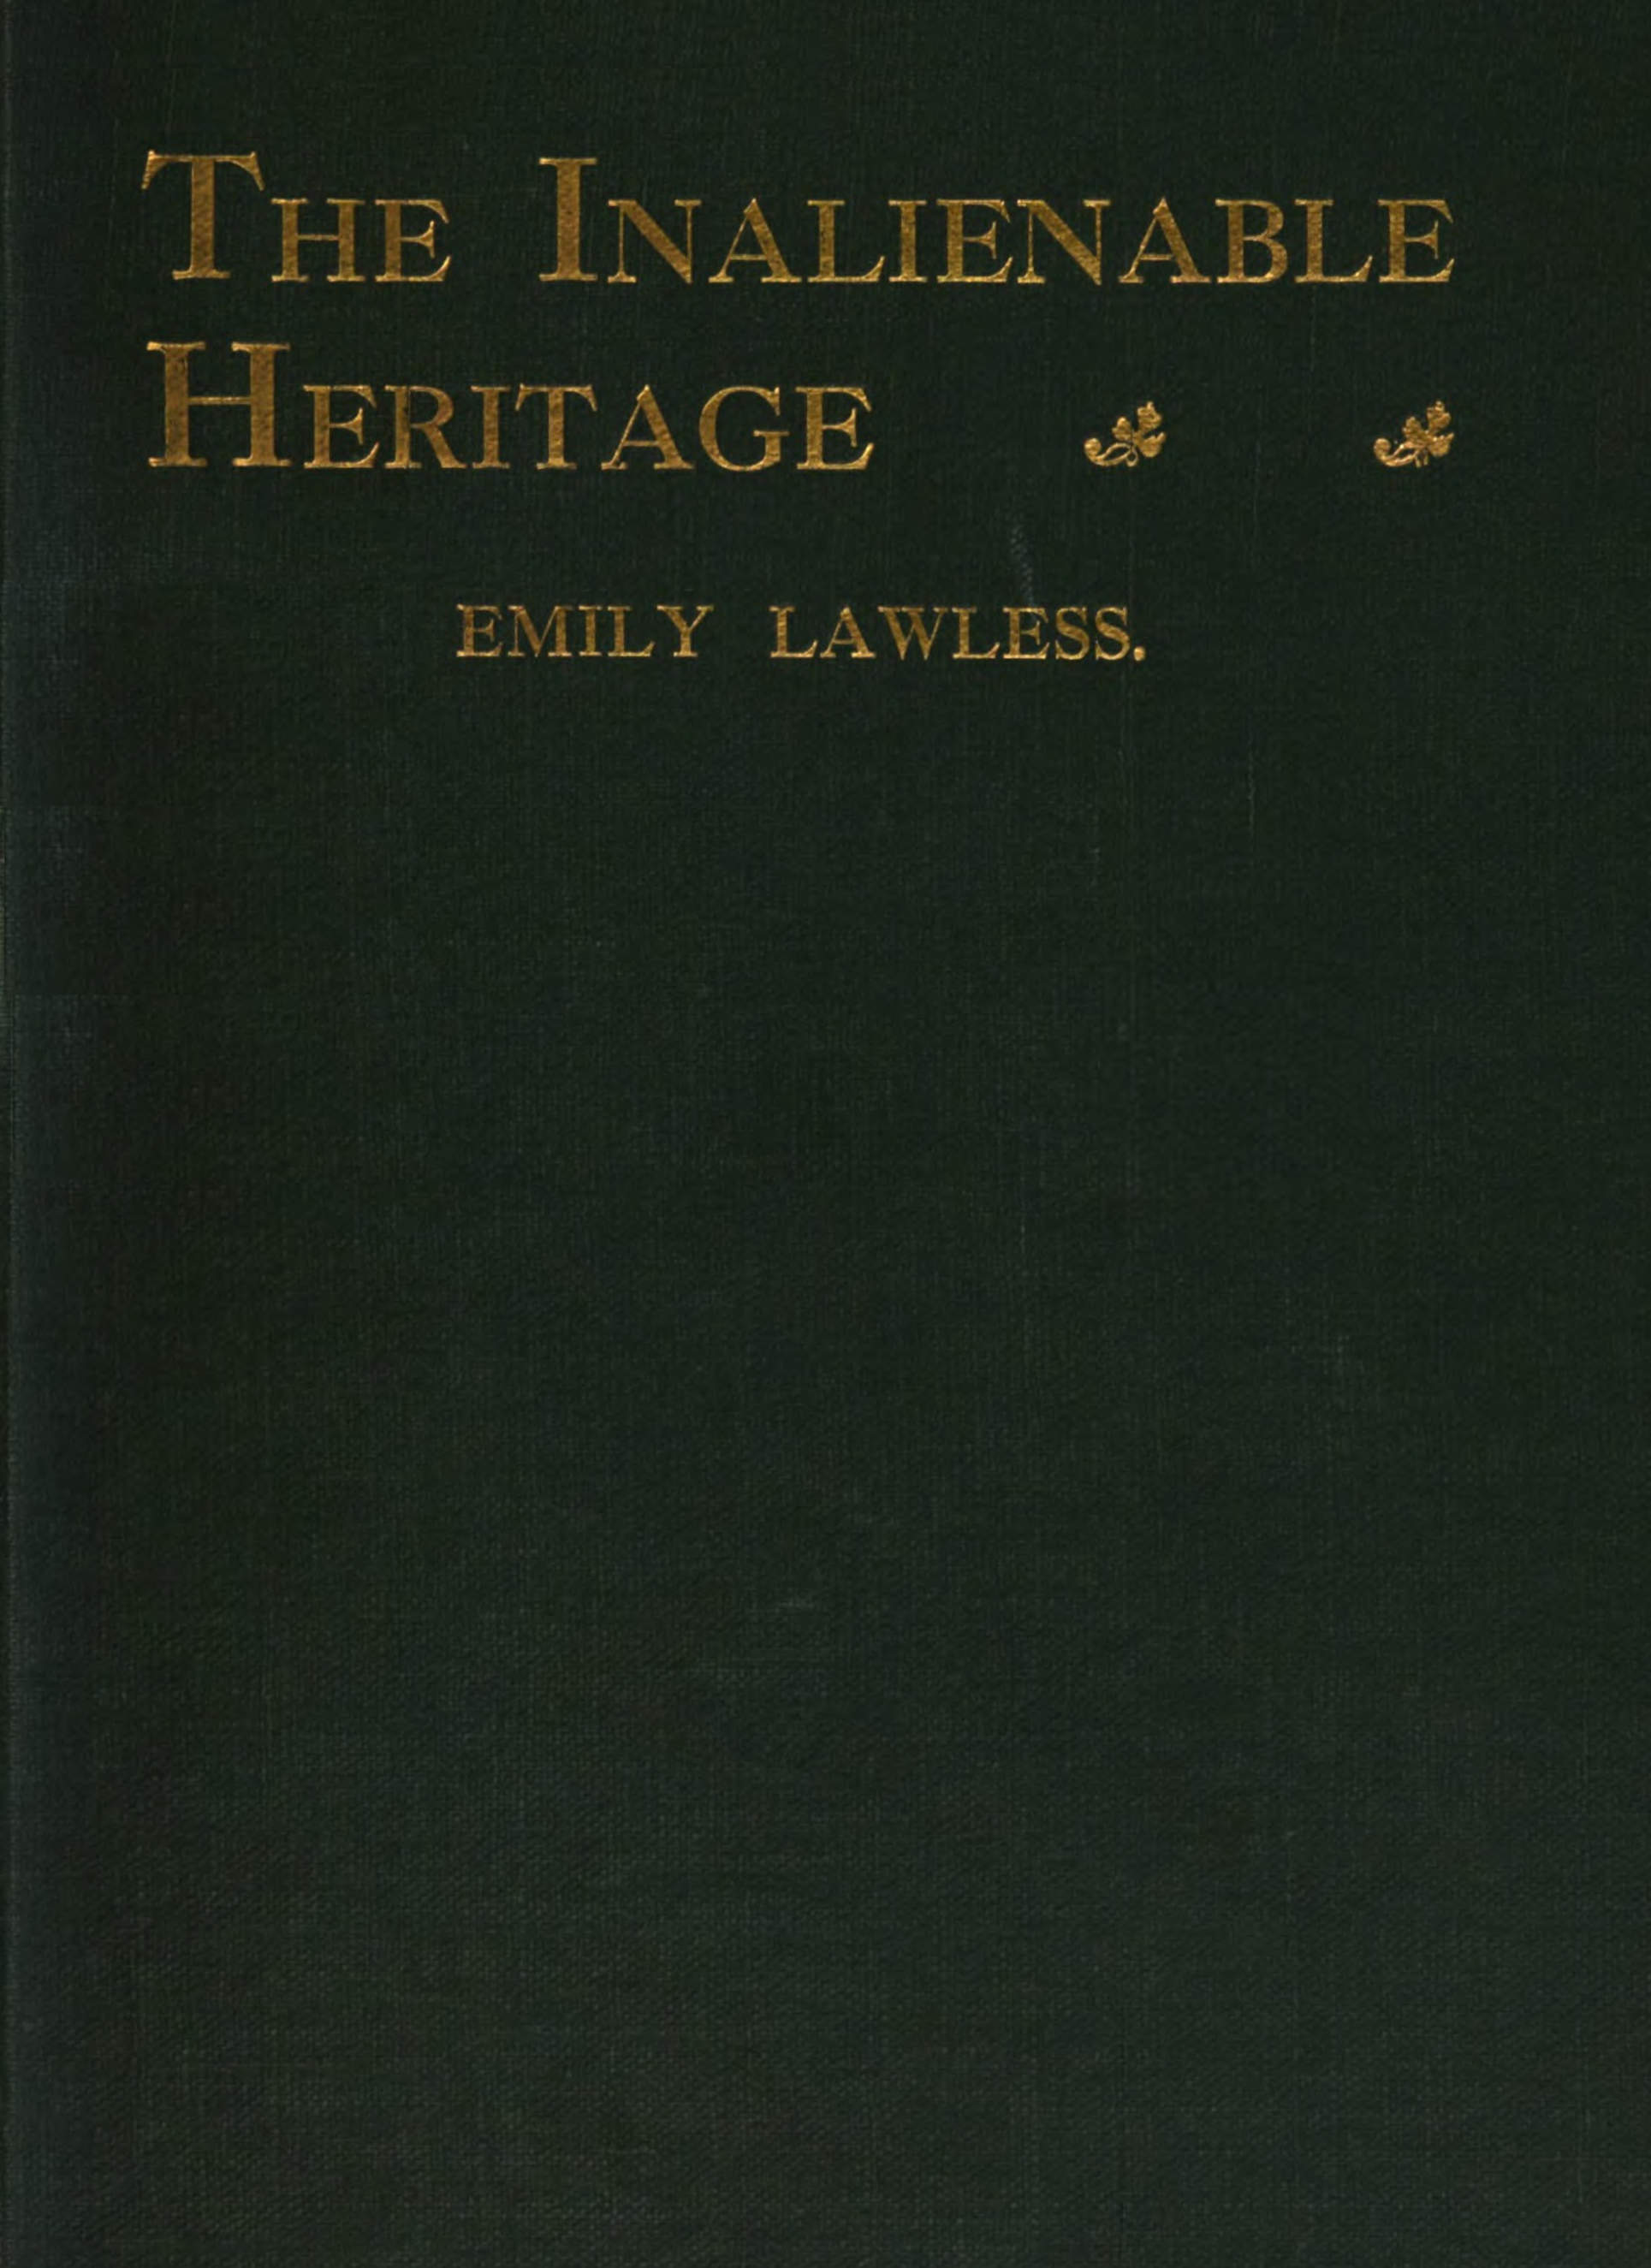 The inalienable heritage, and other poems